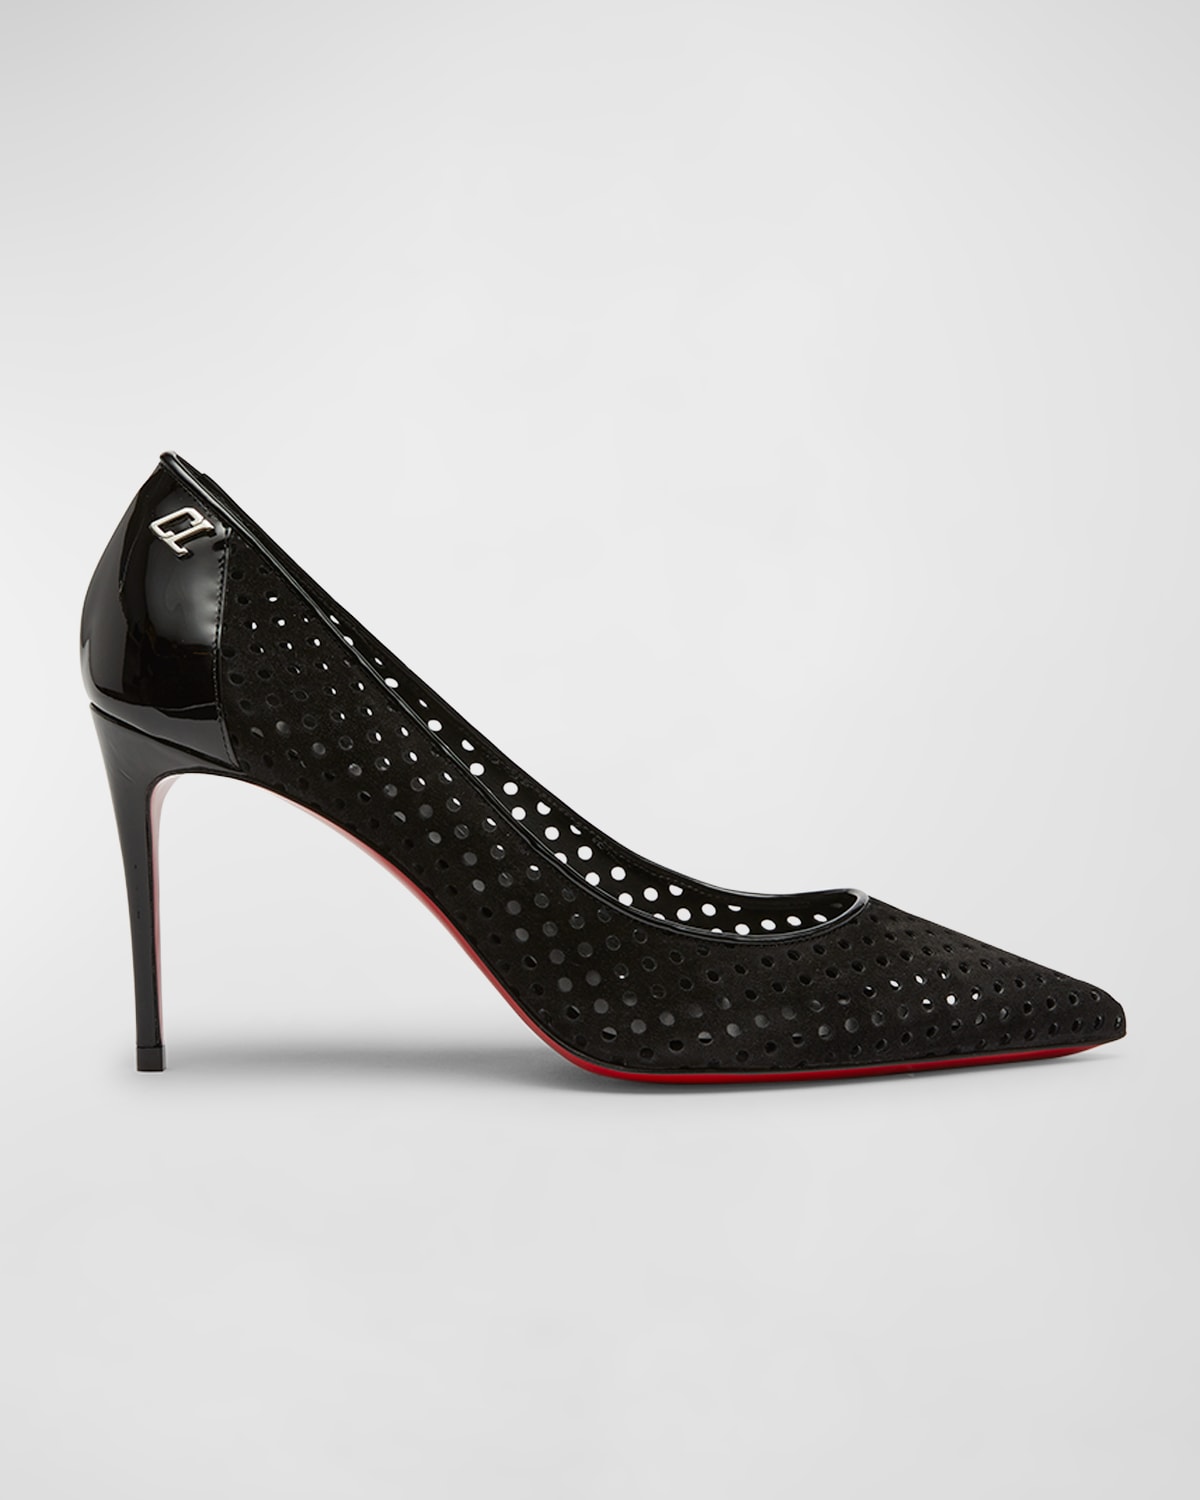 CHRISTIAN LOUBOUTIN KATE PERFORATED SUEDE RED SOLE PUMPS